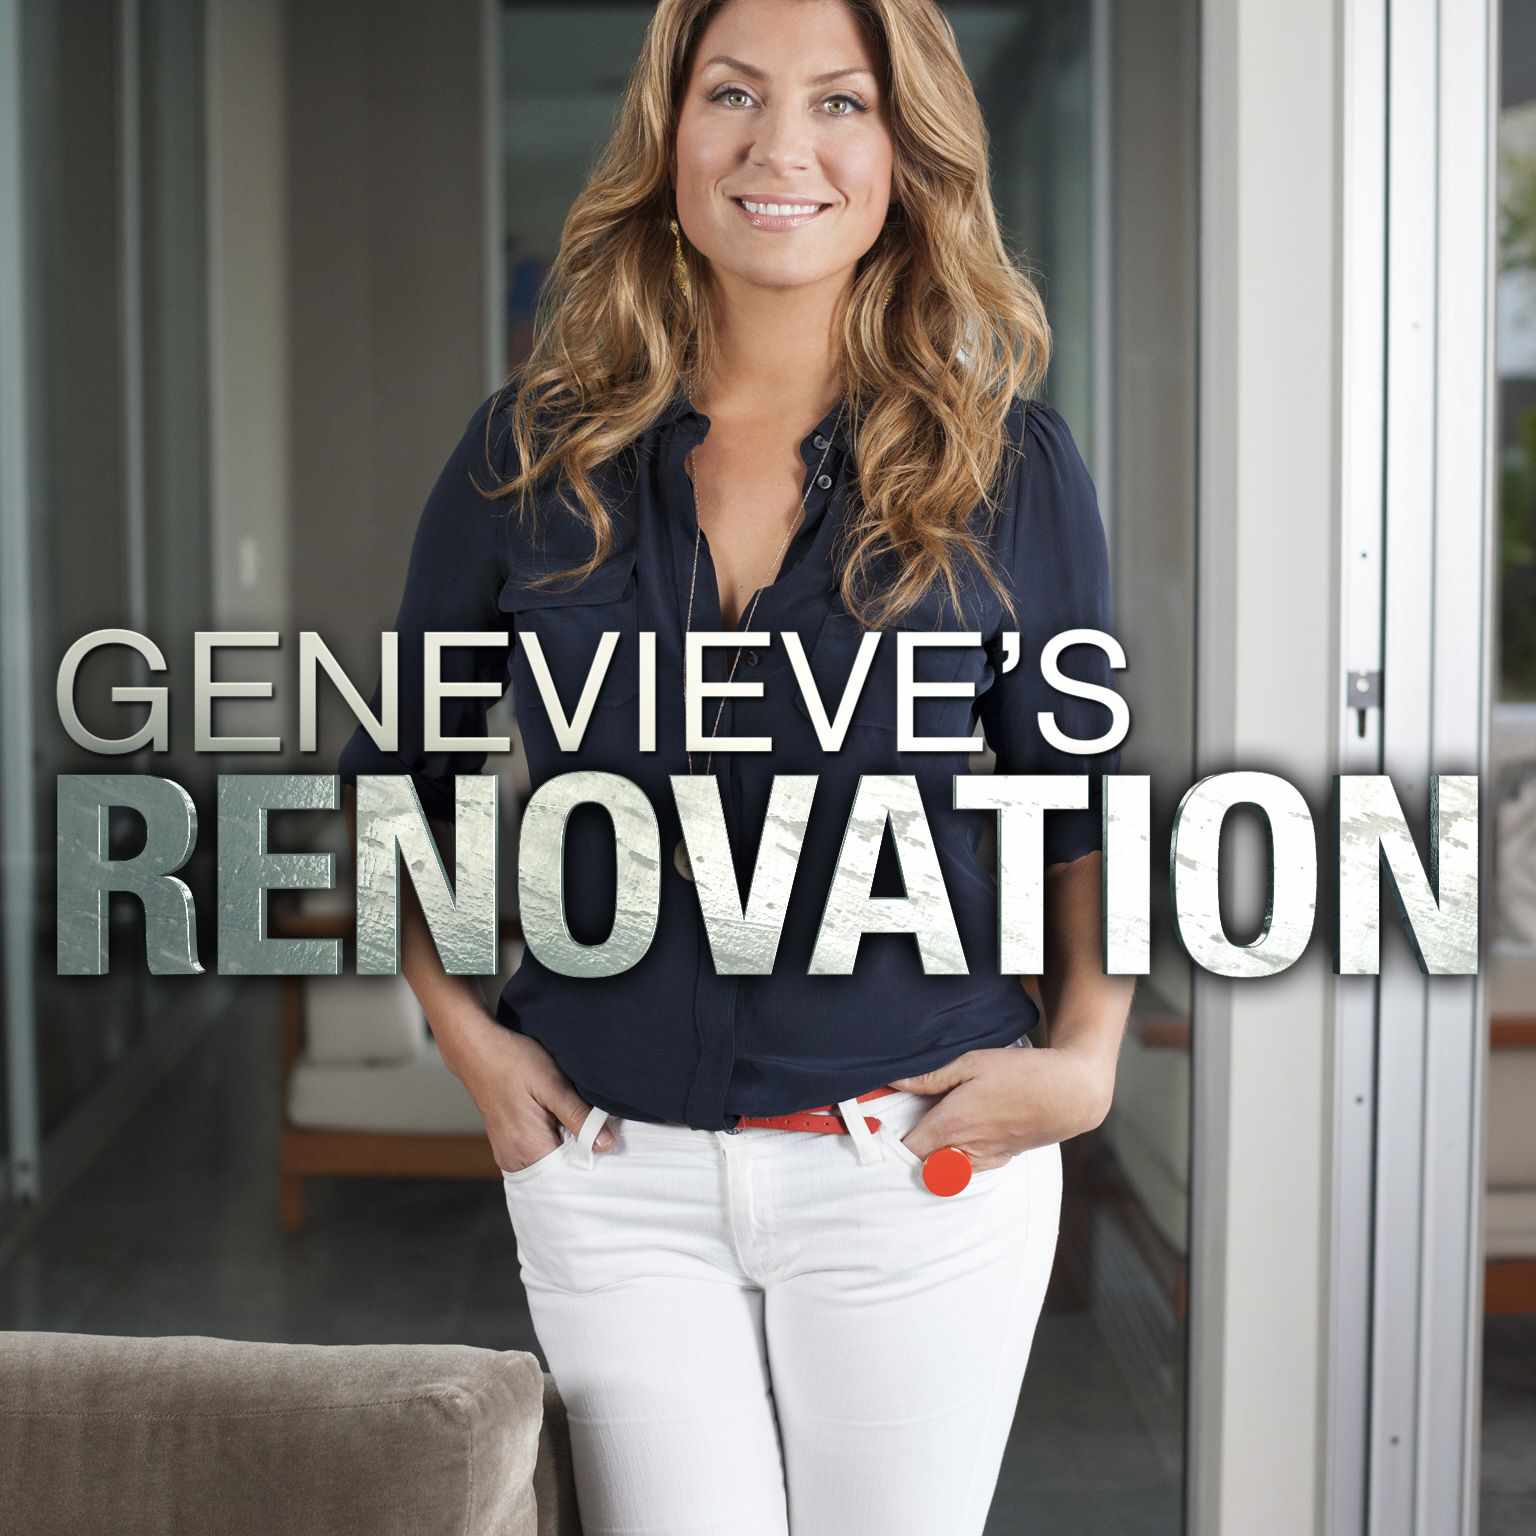 Who is genevive on the show genevie renovation